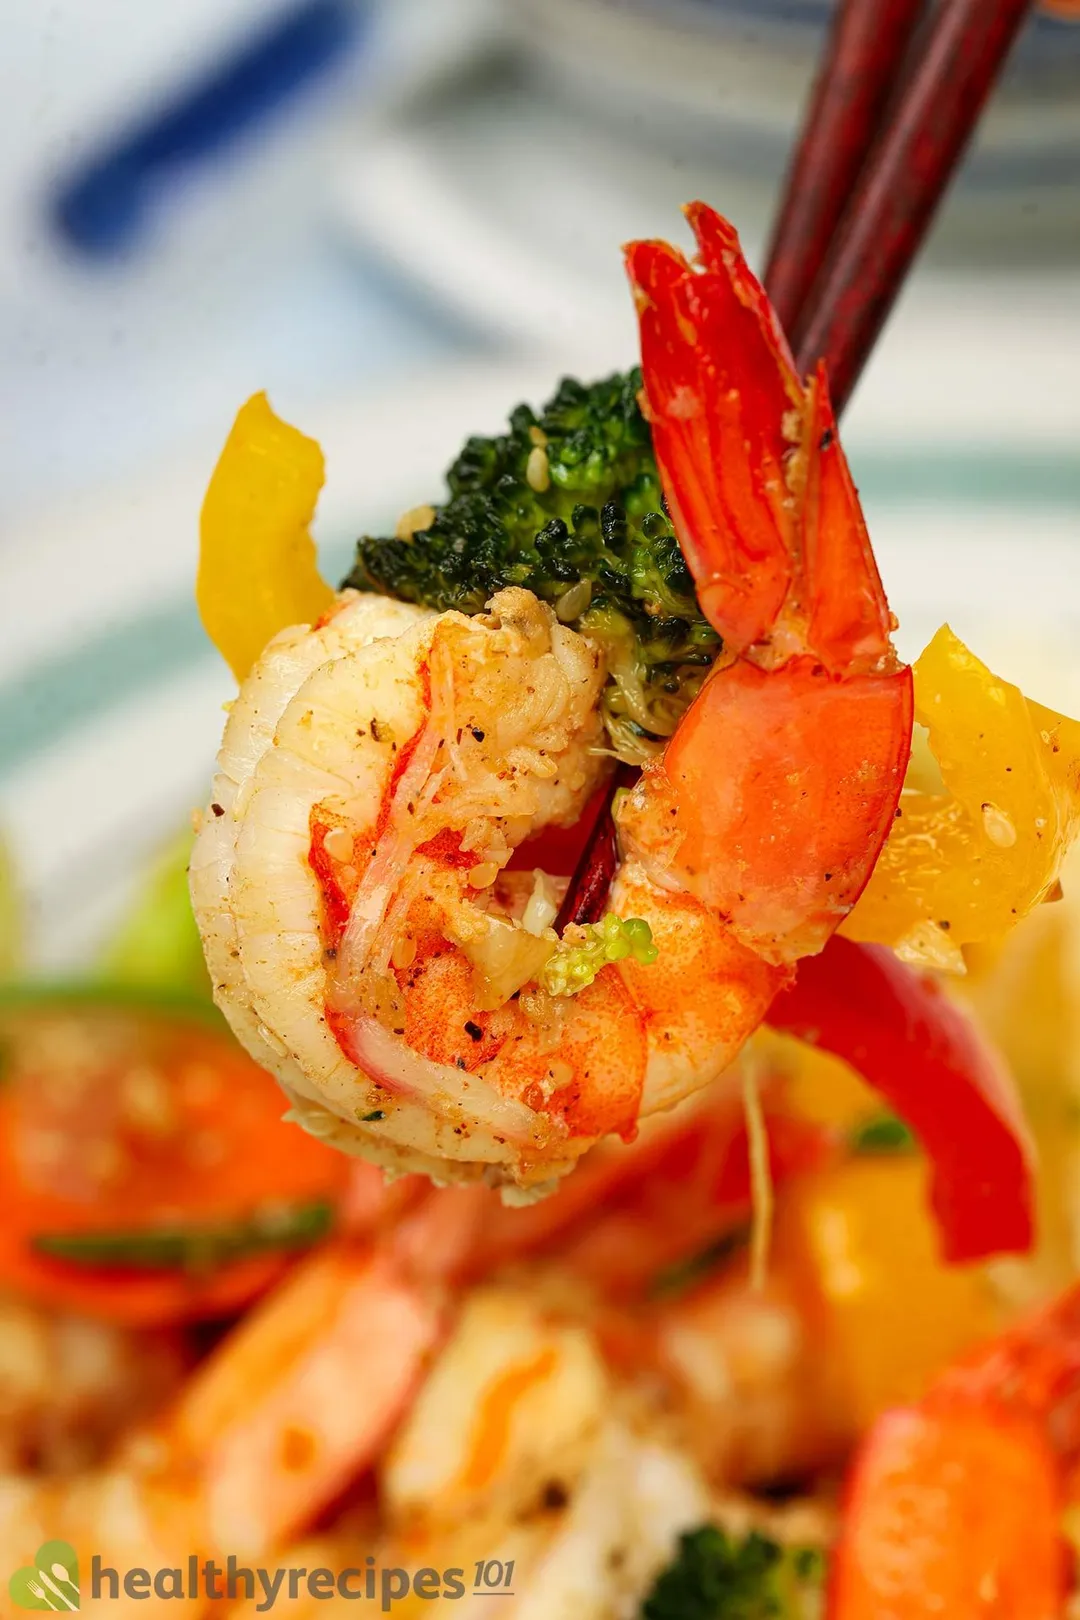 A close-up picture of sautéed shrimp, broccoli and bell pepper with a chopstick.